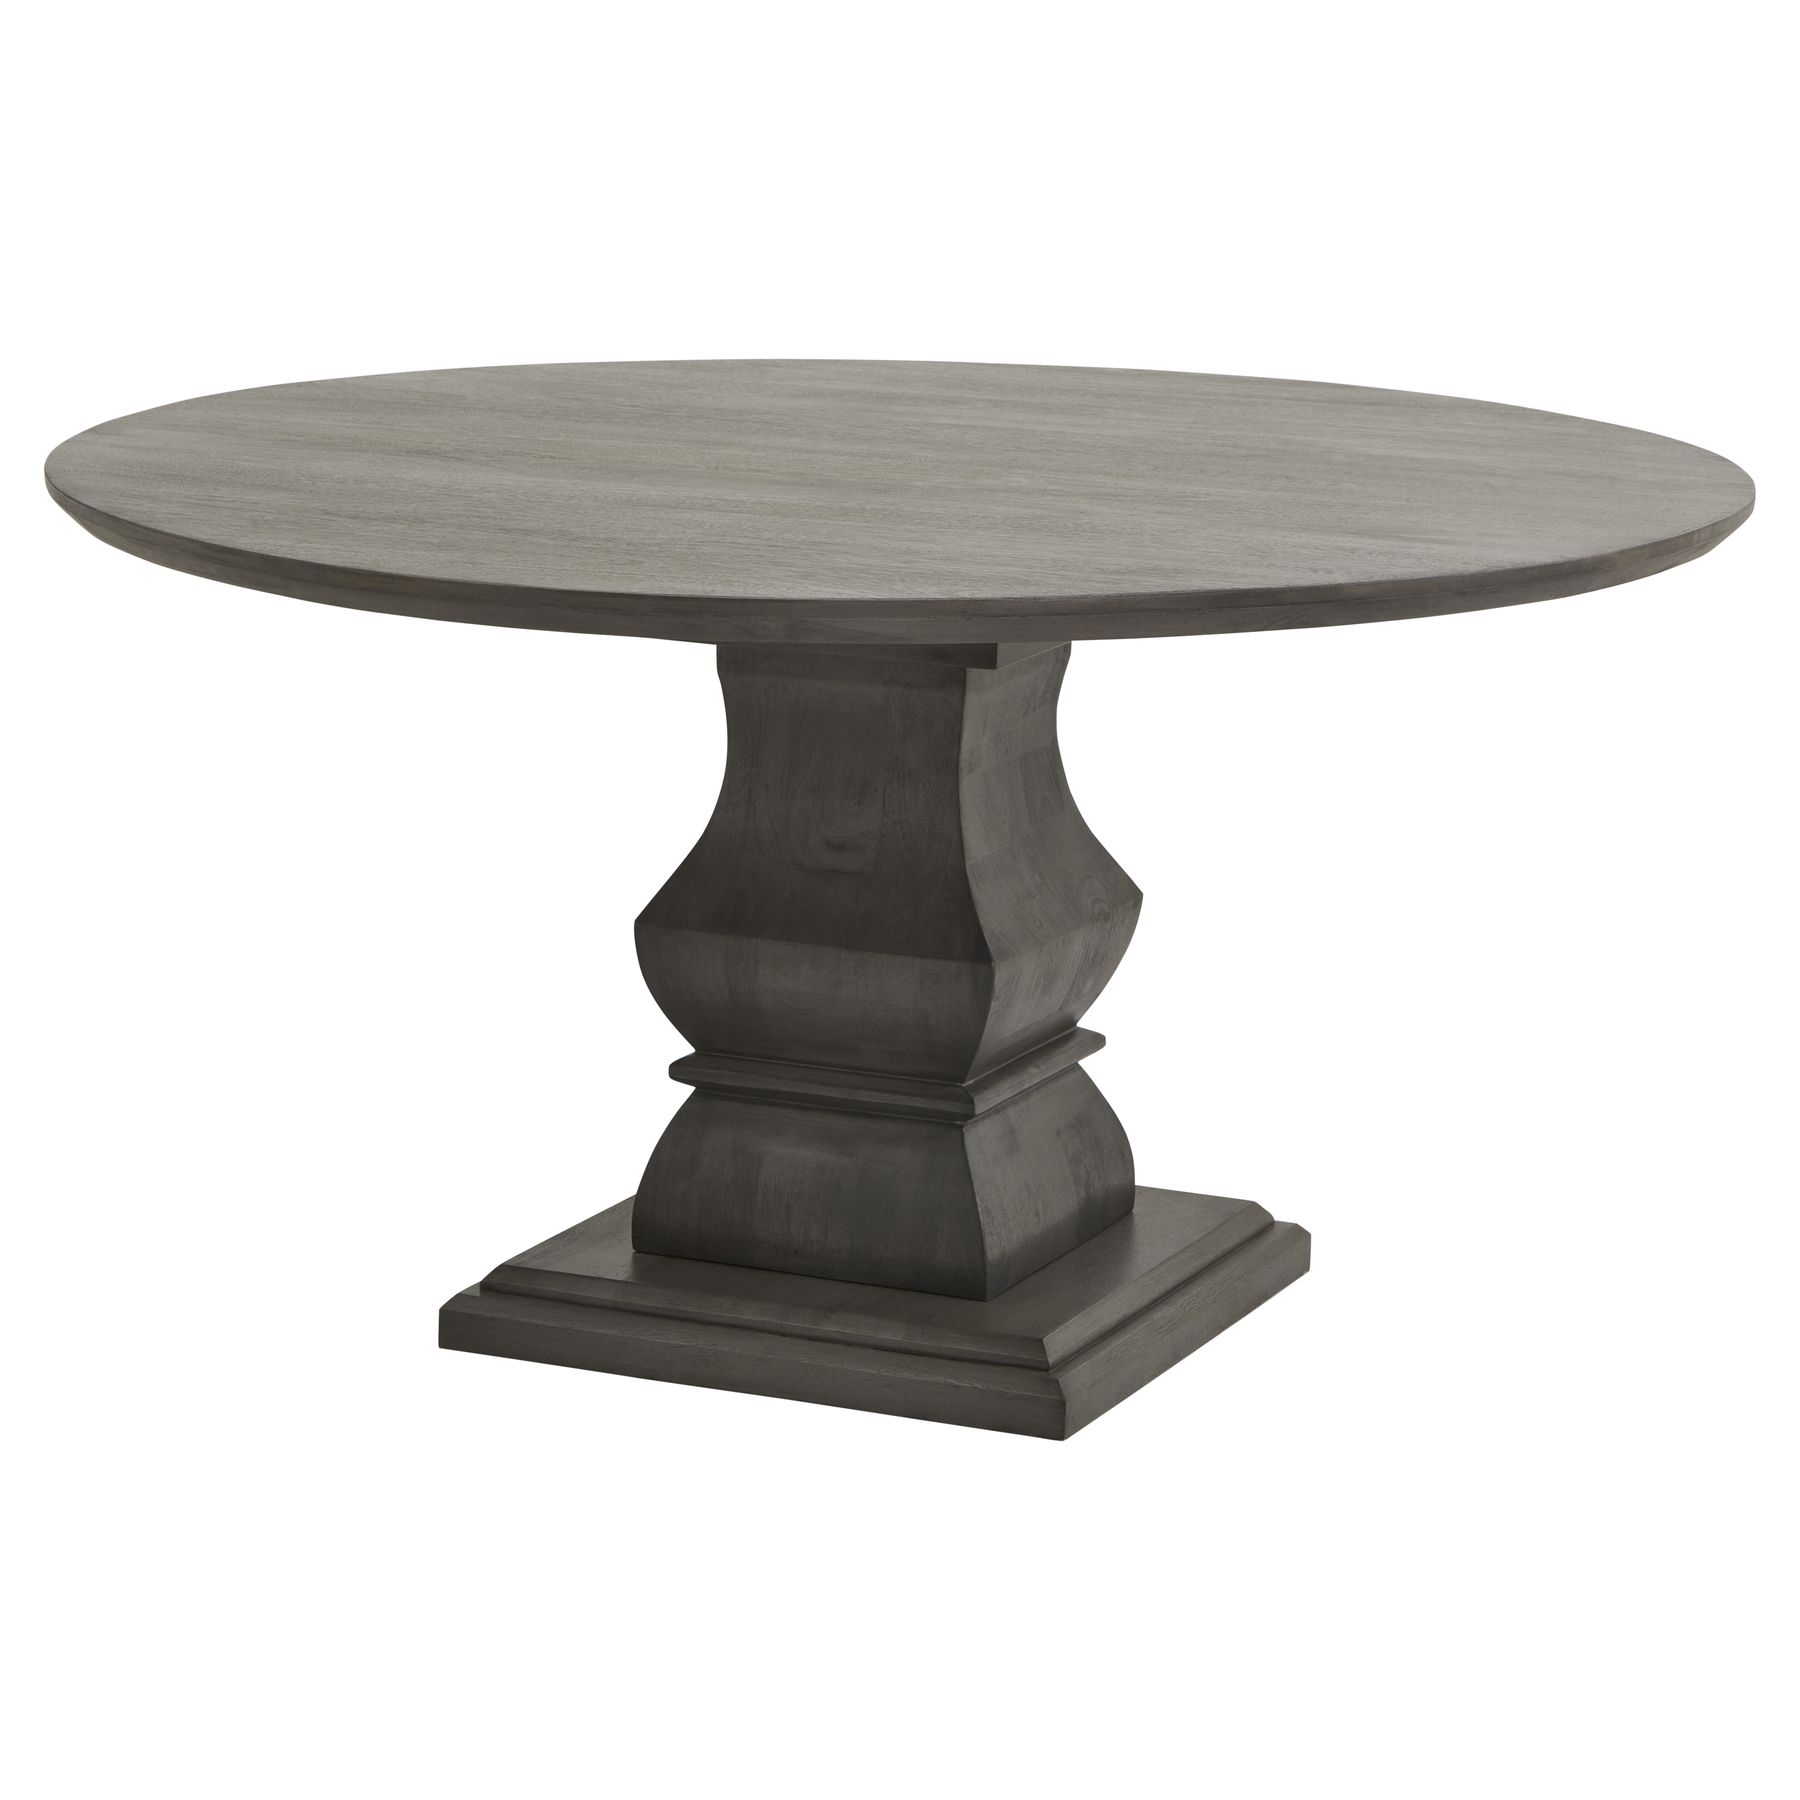 Lucia Collection Round Dining Table - Image 1